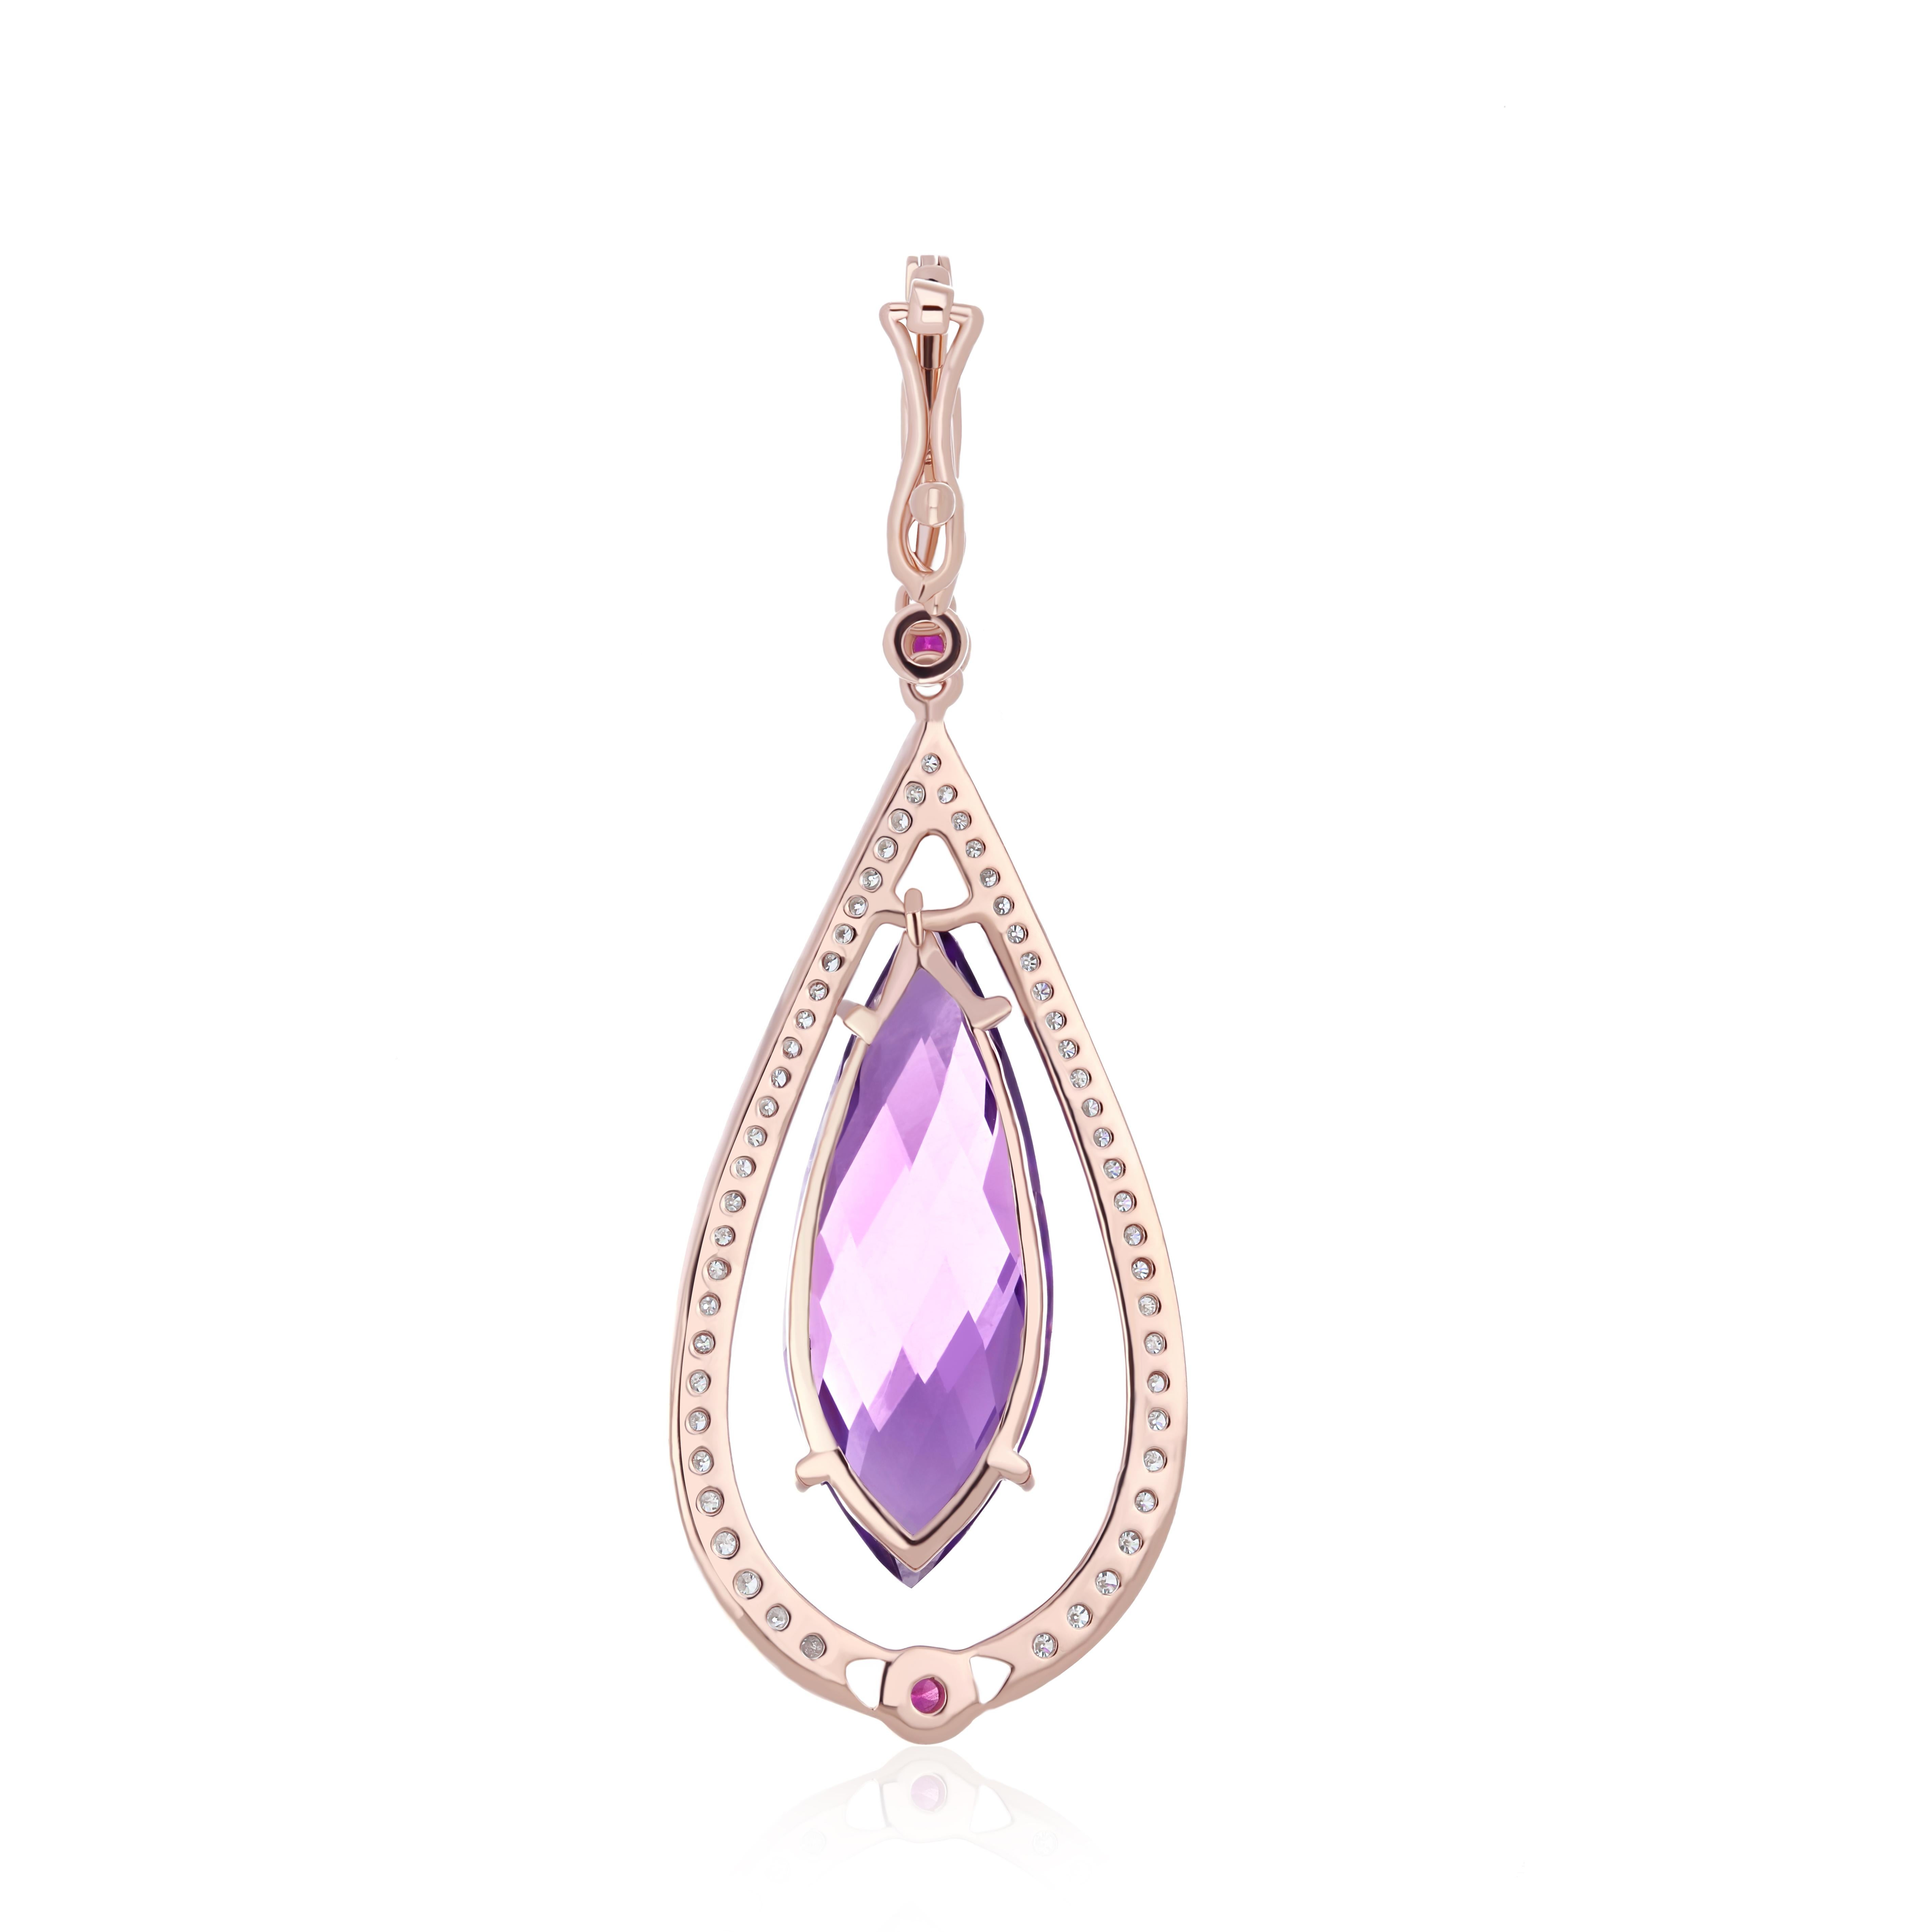 Marquise Cut 5.15Cts Amethyst, Ruby & Diamond Pendant in 14K Rose Gold Handmade jewelry  For Sale